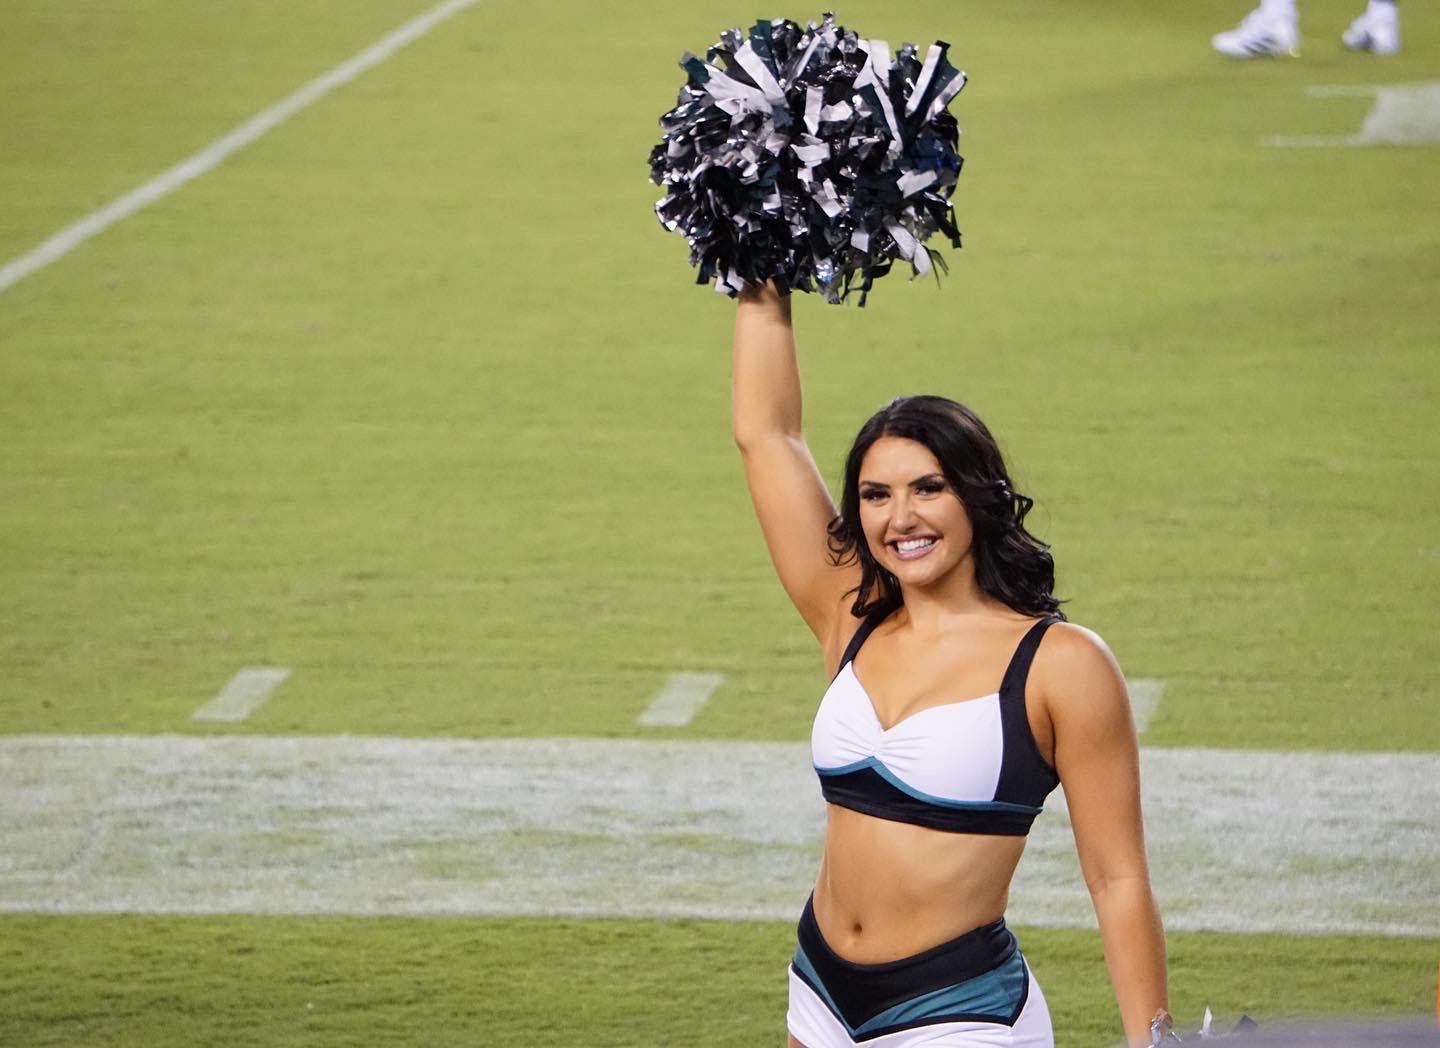 From Bucks to the Big Game- Meet Eagles Cheerleader & The Dance Academy’s Ashley Hillis